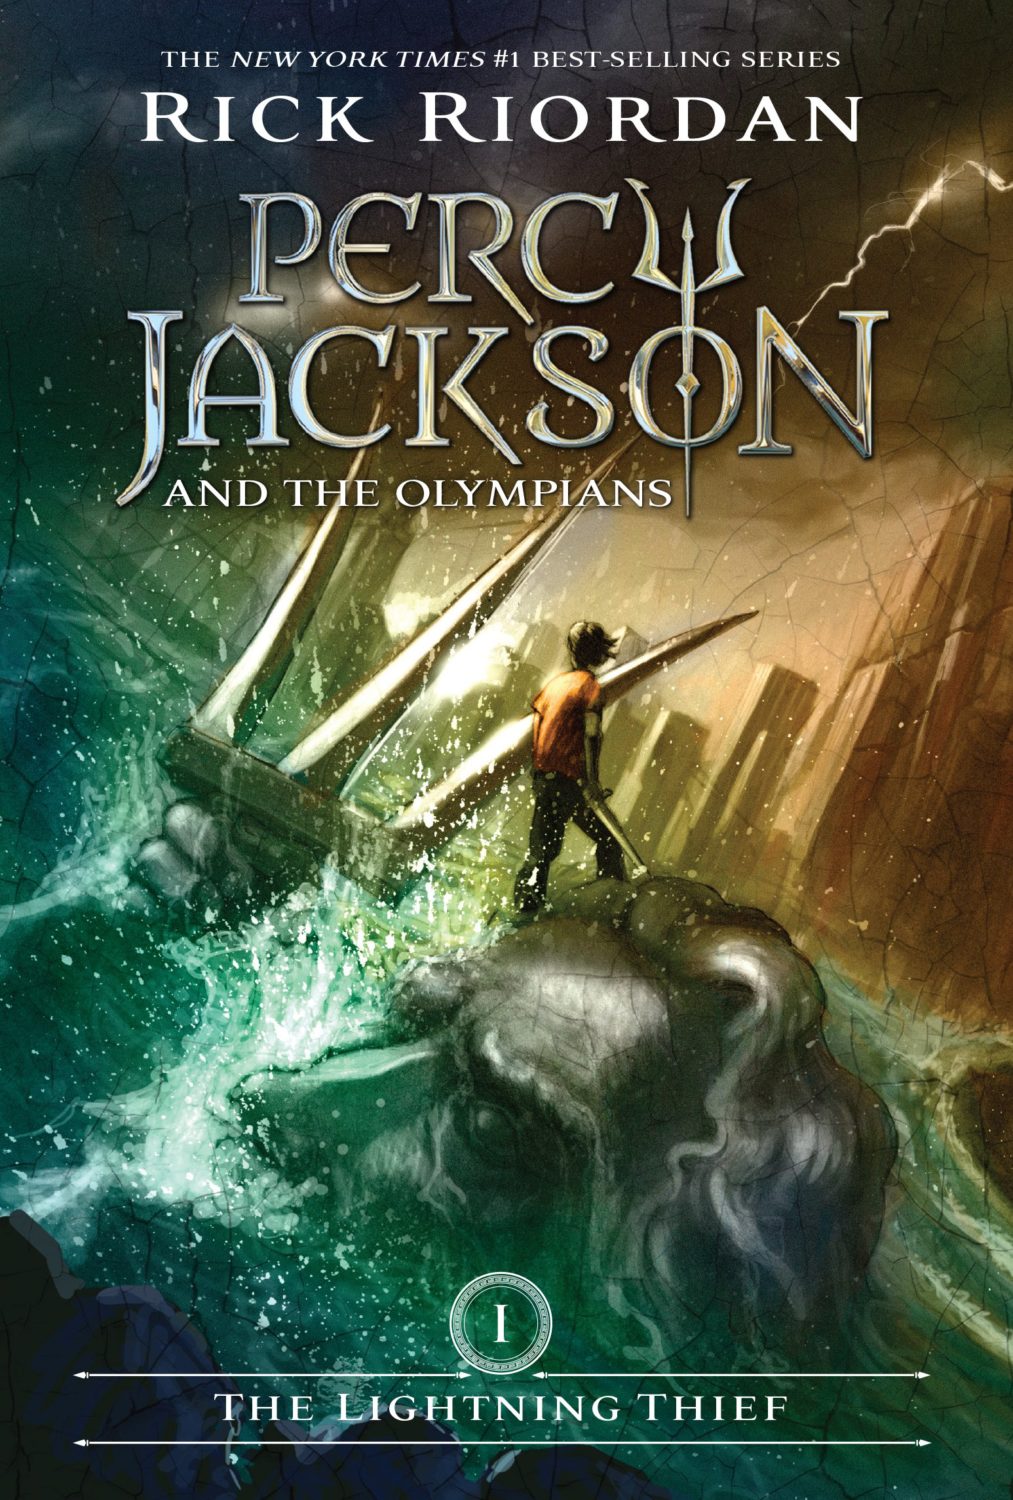 Percy Jackson Books in Order